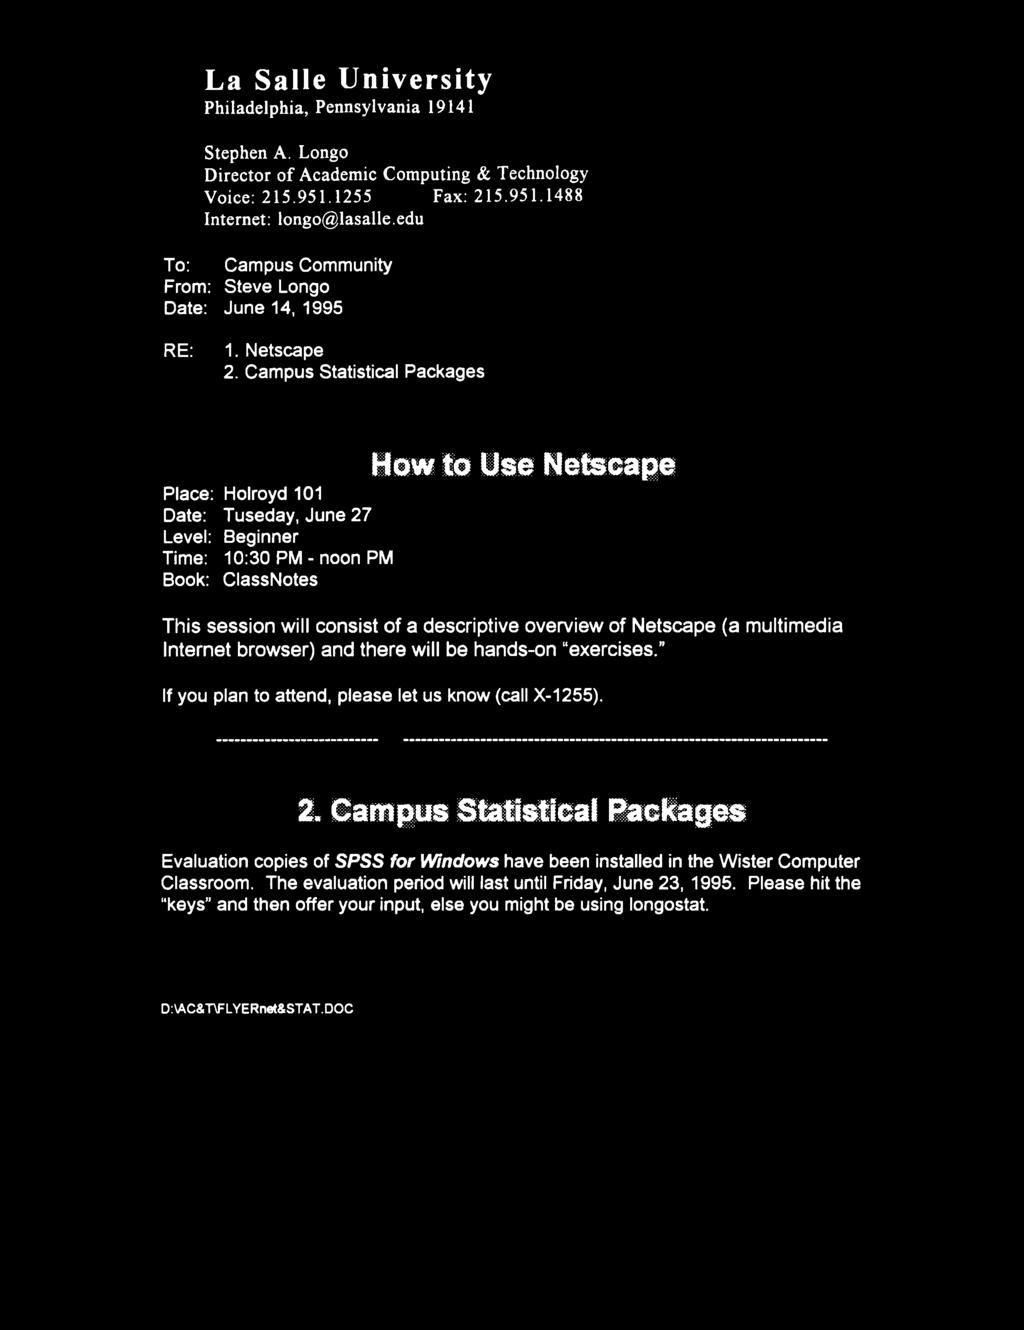 Campus Statistical Packages Place: Holroyd 101 Date: Tuseday, June 27 Level: Beginner Time: 10:30 PM - noon PM Book: ClassNotes How to Use Netscape